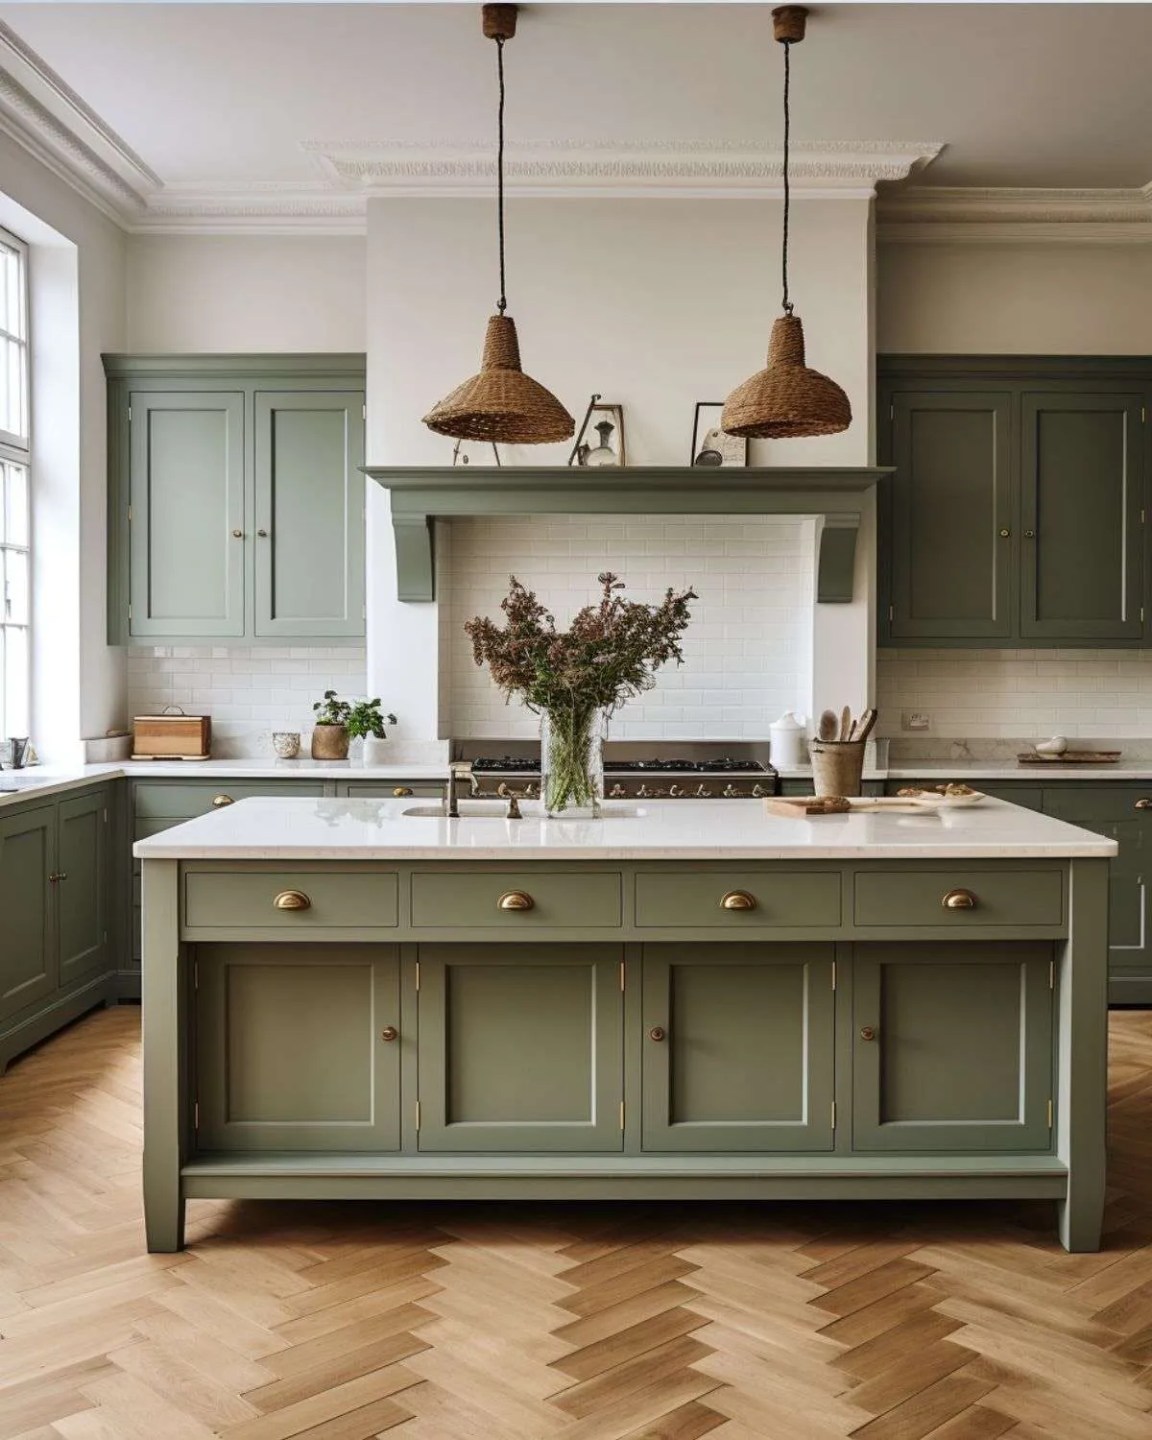 a sage green kitchen with marble countertops, island, parquet flooring and a large range